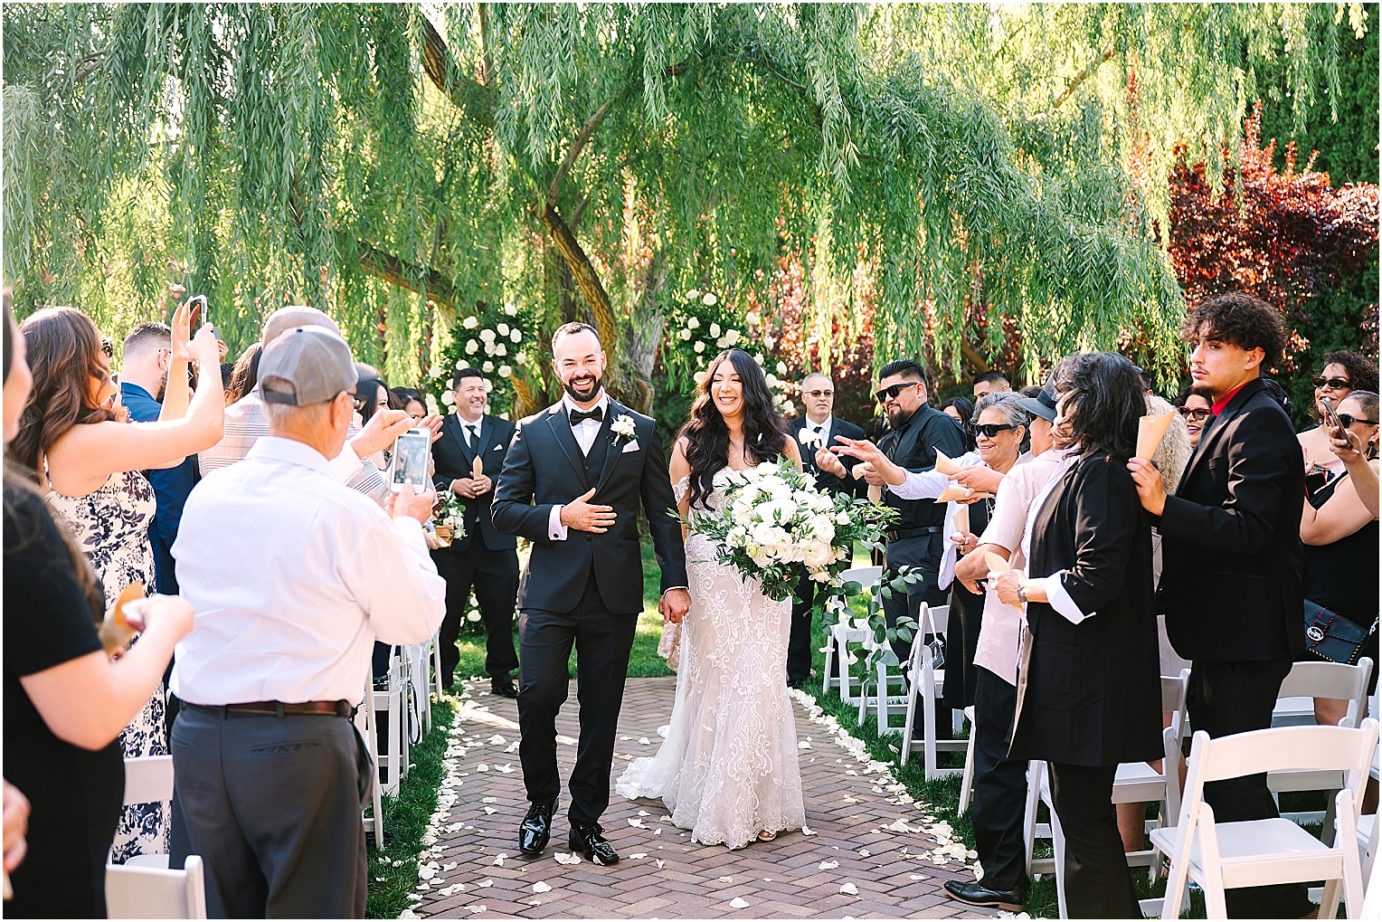 Wedding at Promise Garden bride and groom processional